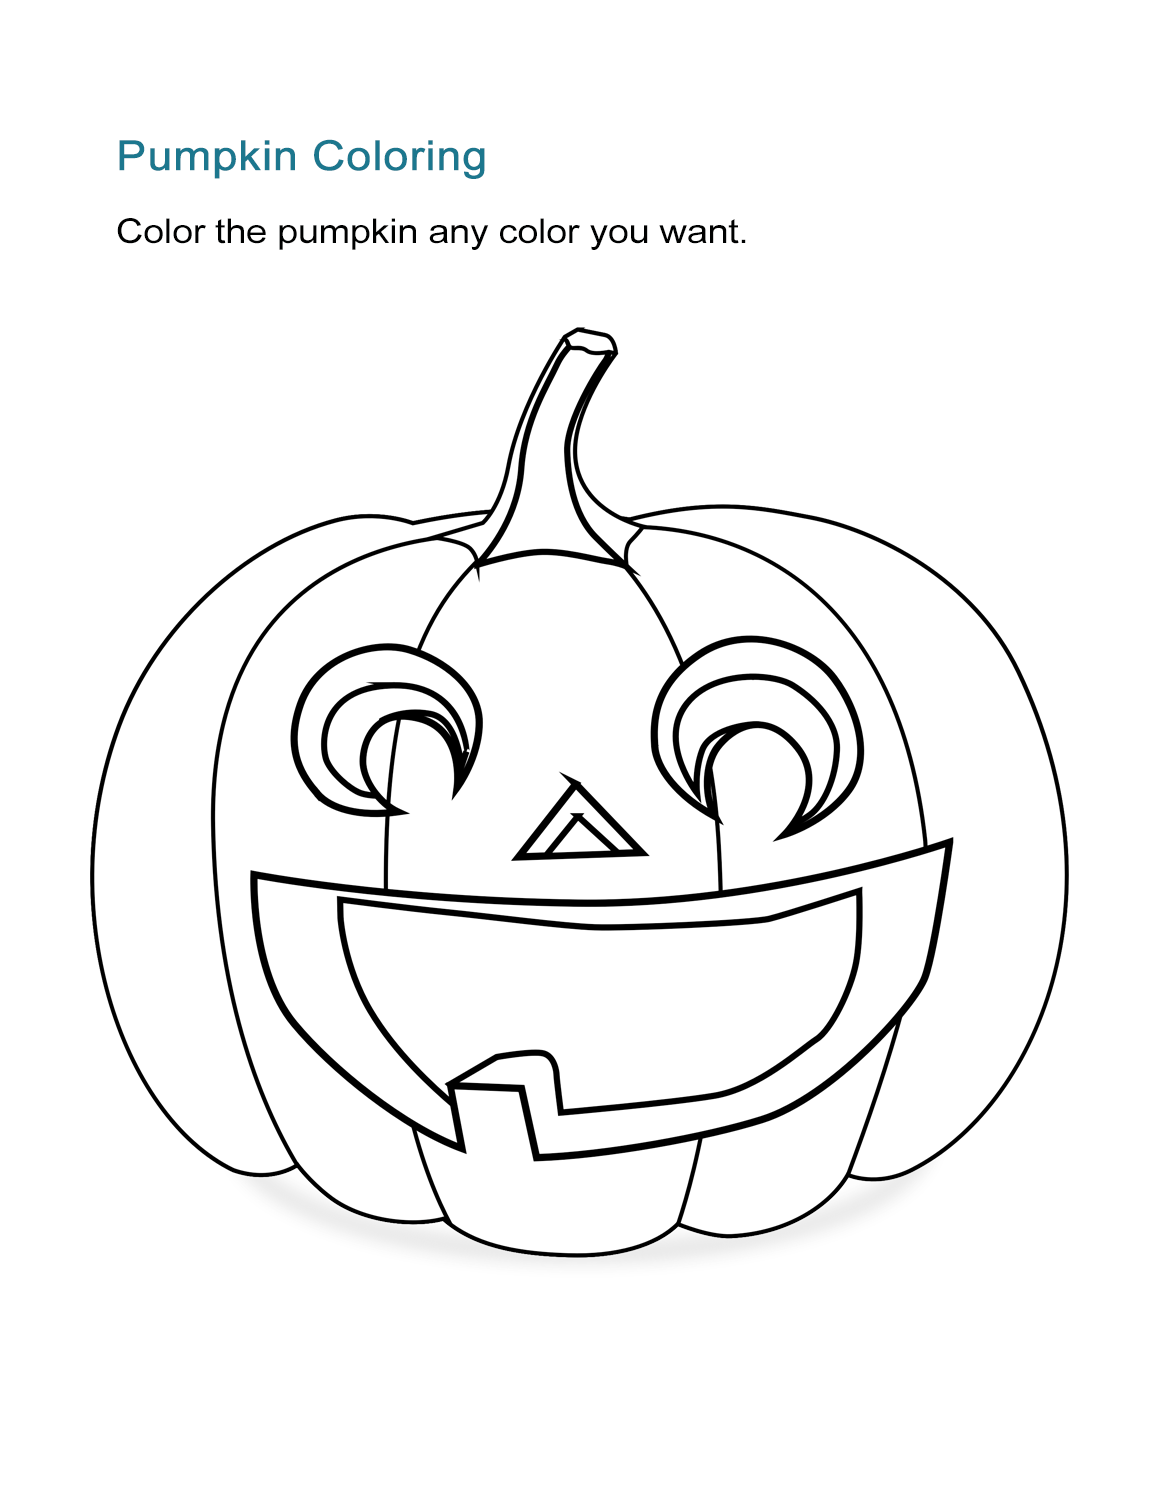 10 Halloween Coloring Sheets: Free And Print-Ready - All Esl